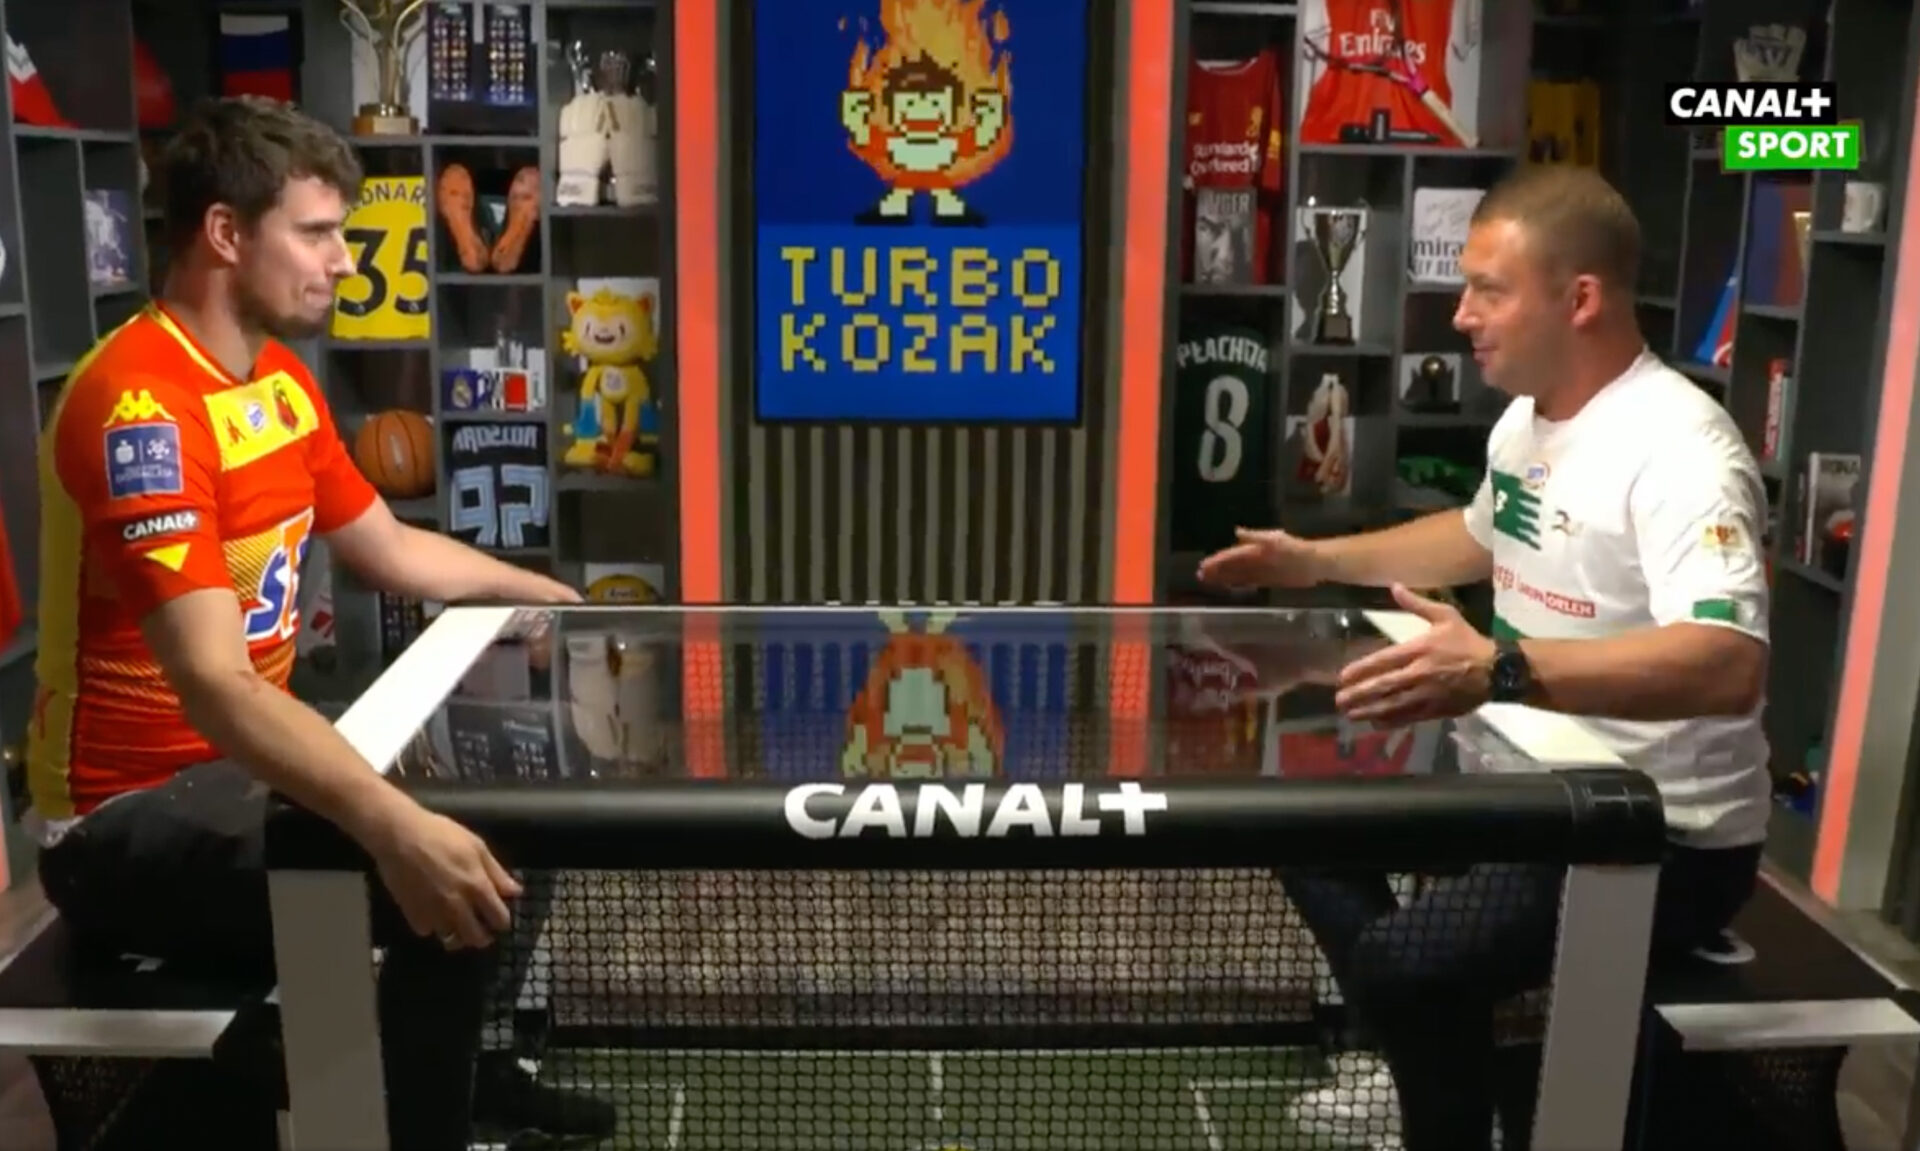 Canal+ Subsoccer table football game